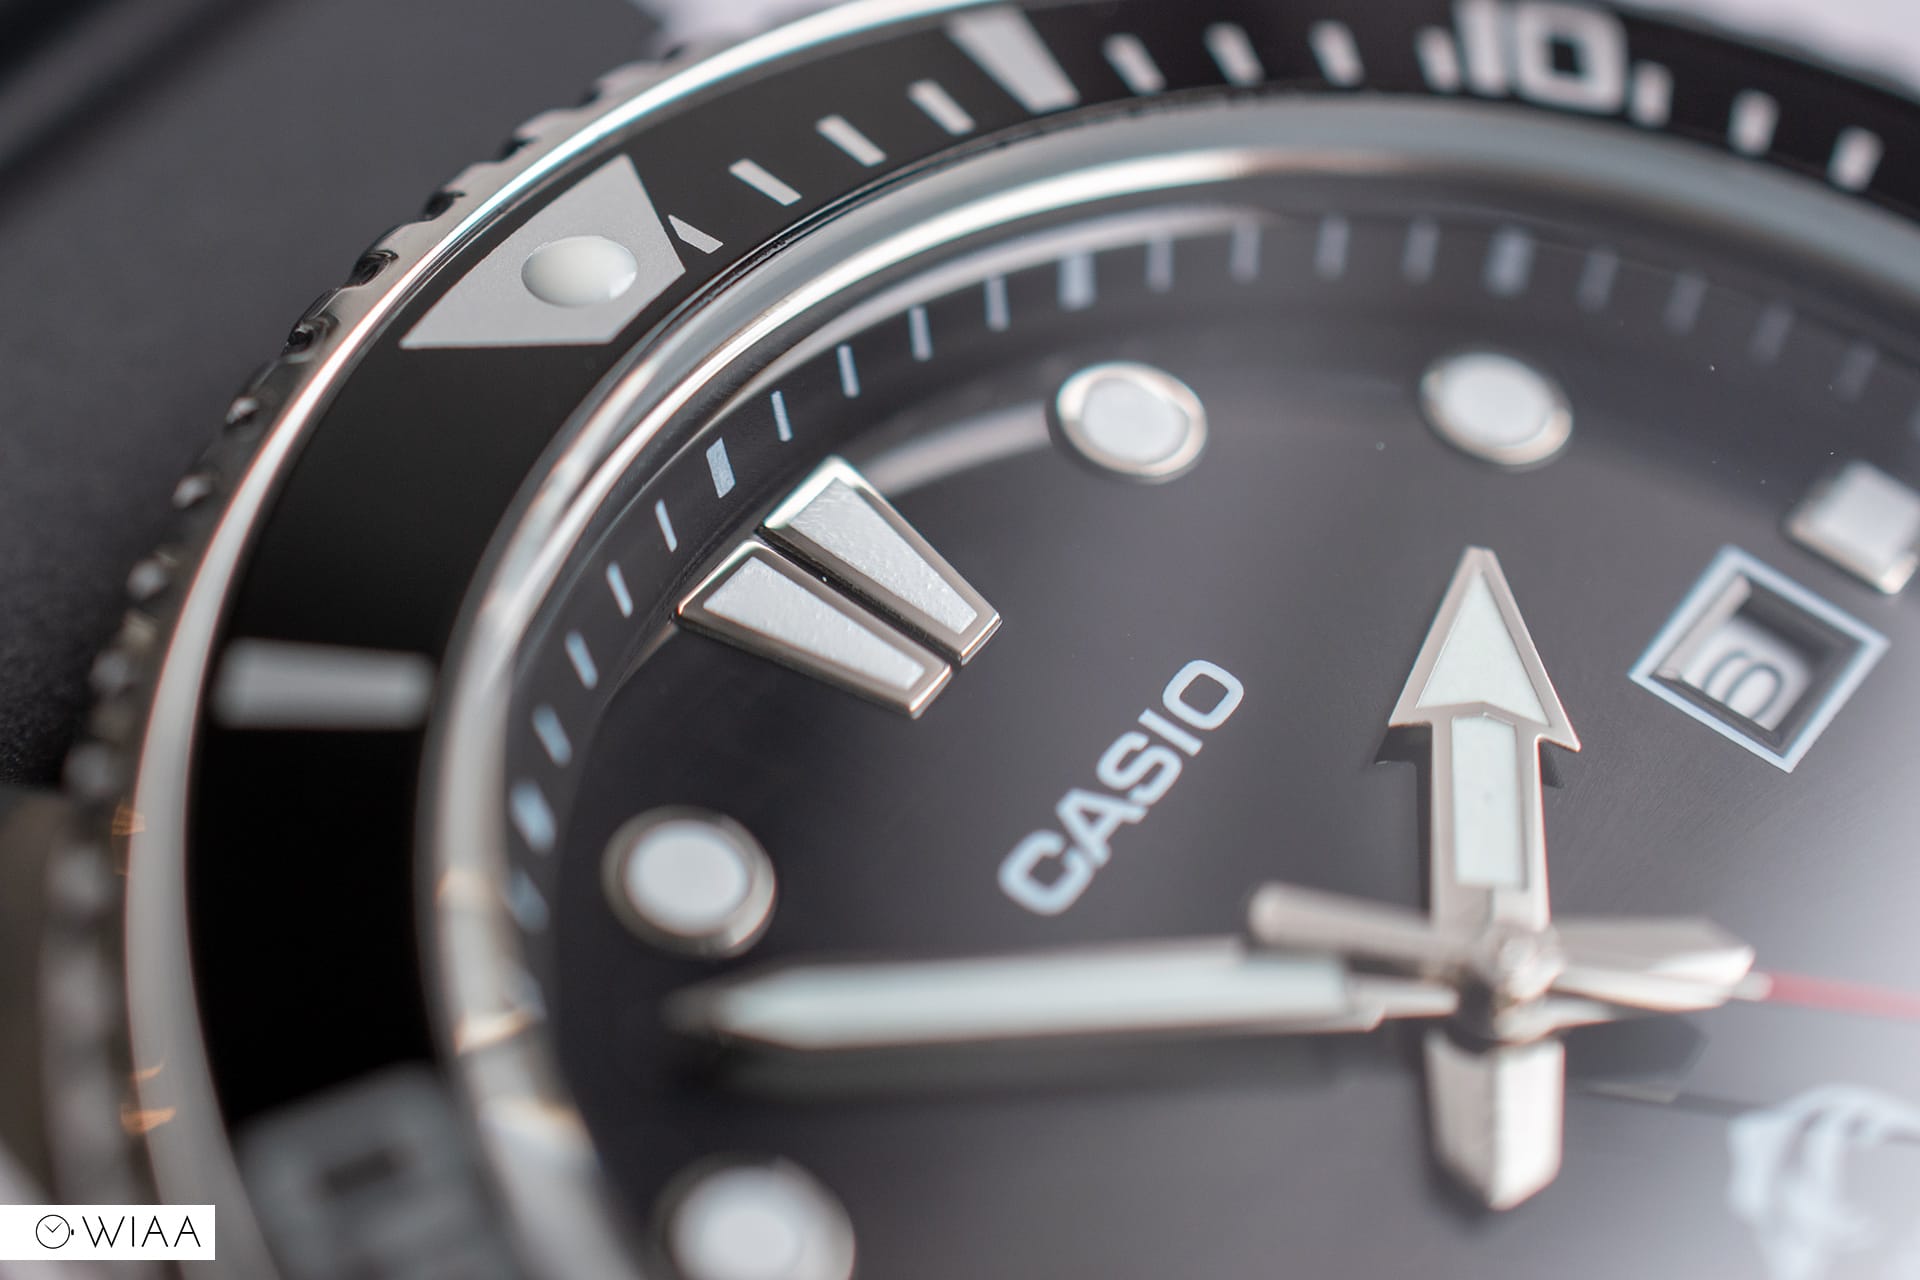 Casio MDV-106 Duro Review - The Truth About Watches